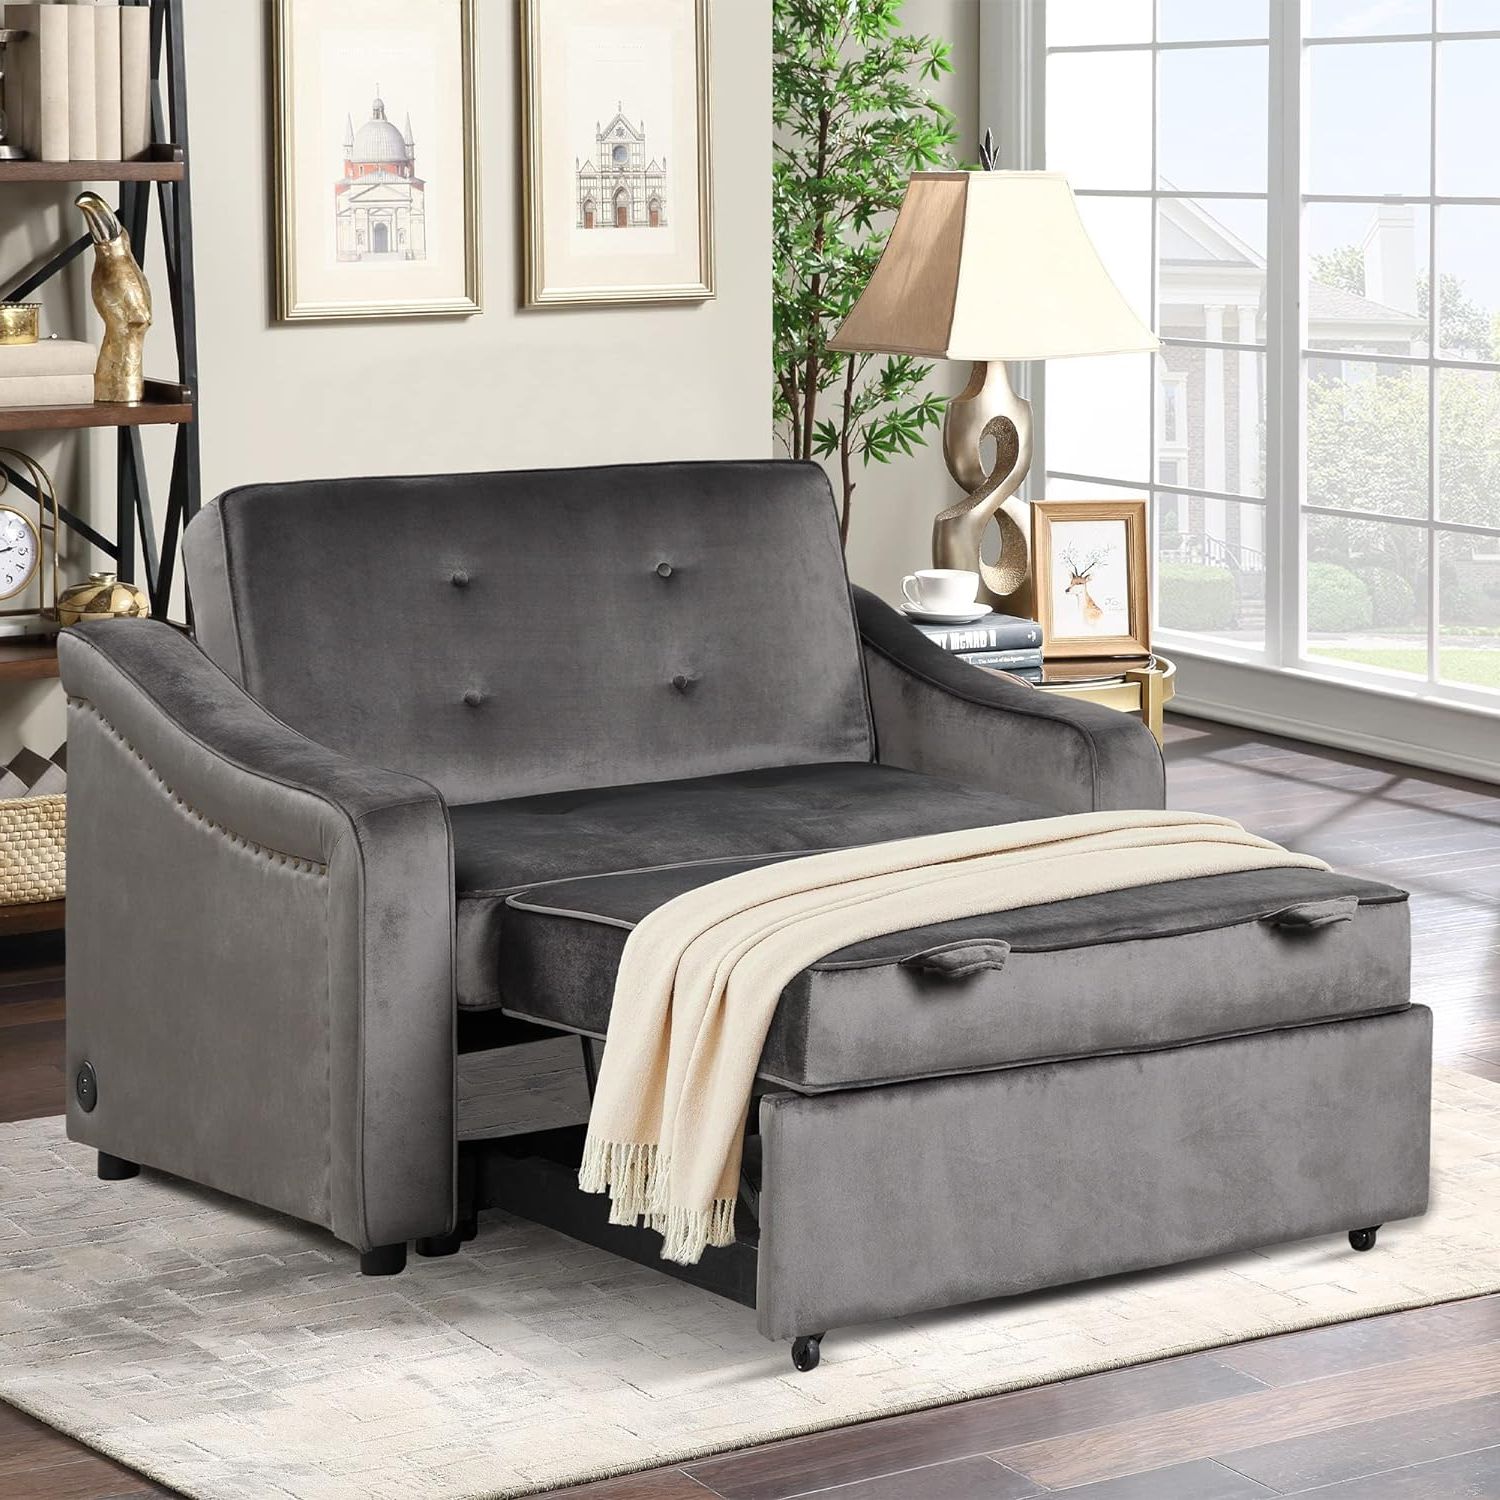 Most Popular Tufted Convertible Sleeper Sofas Pertaining To Merax  (View 15 of 15)